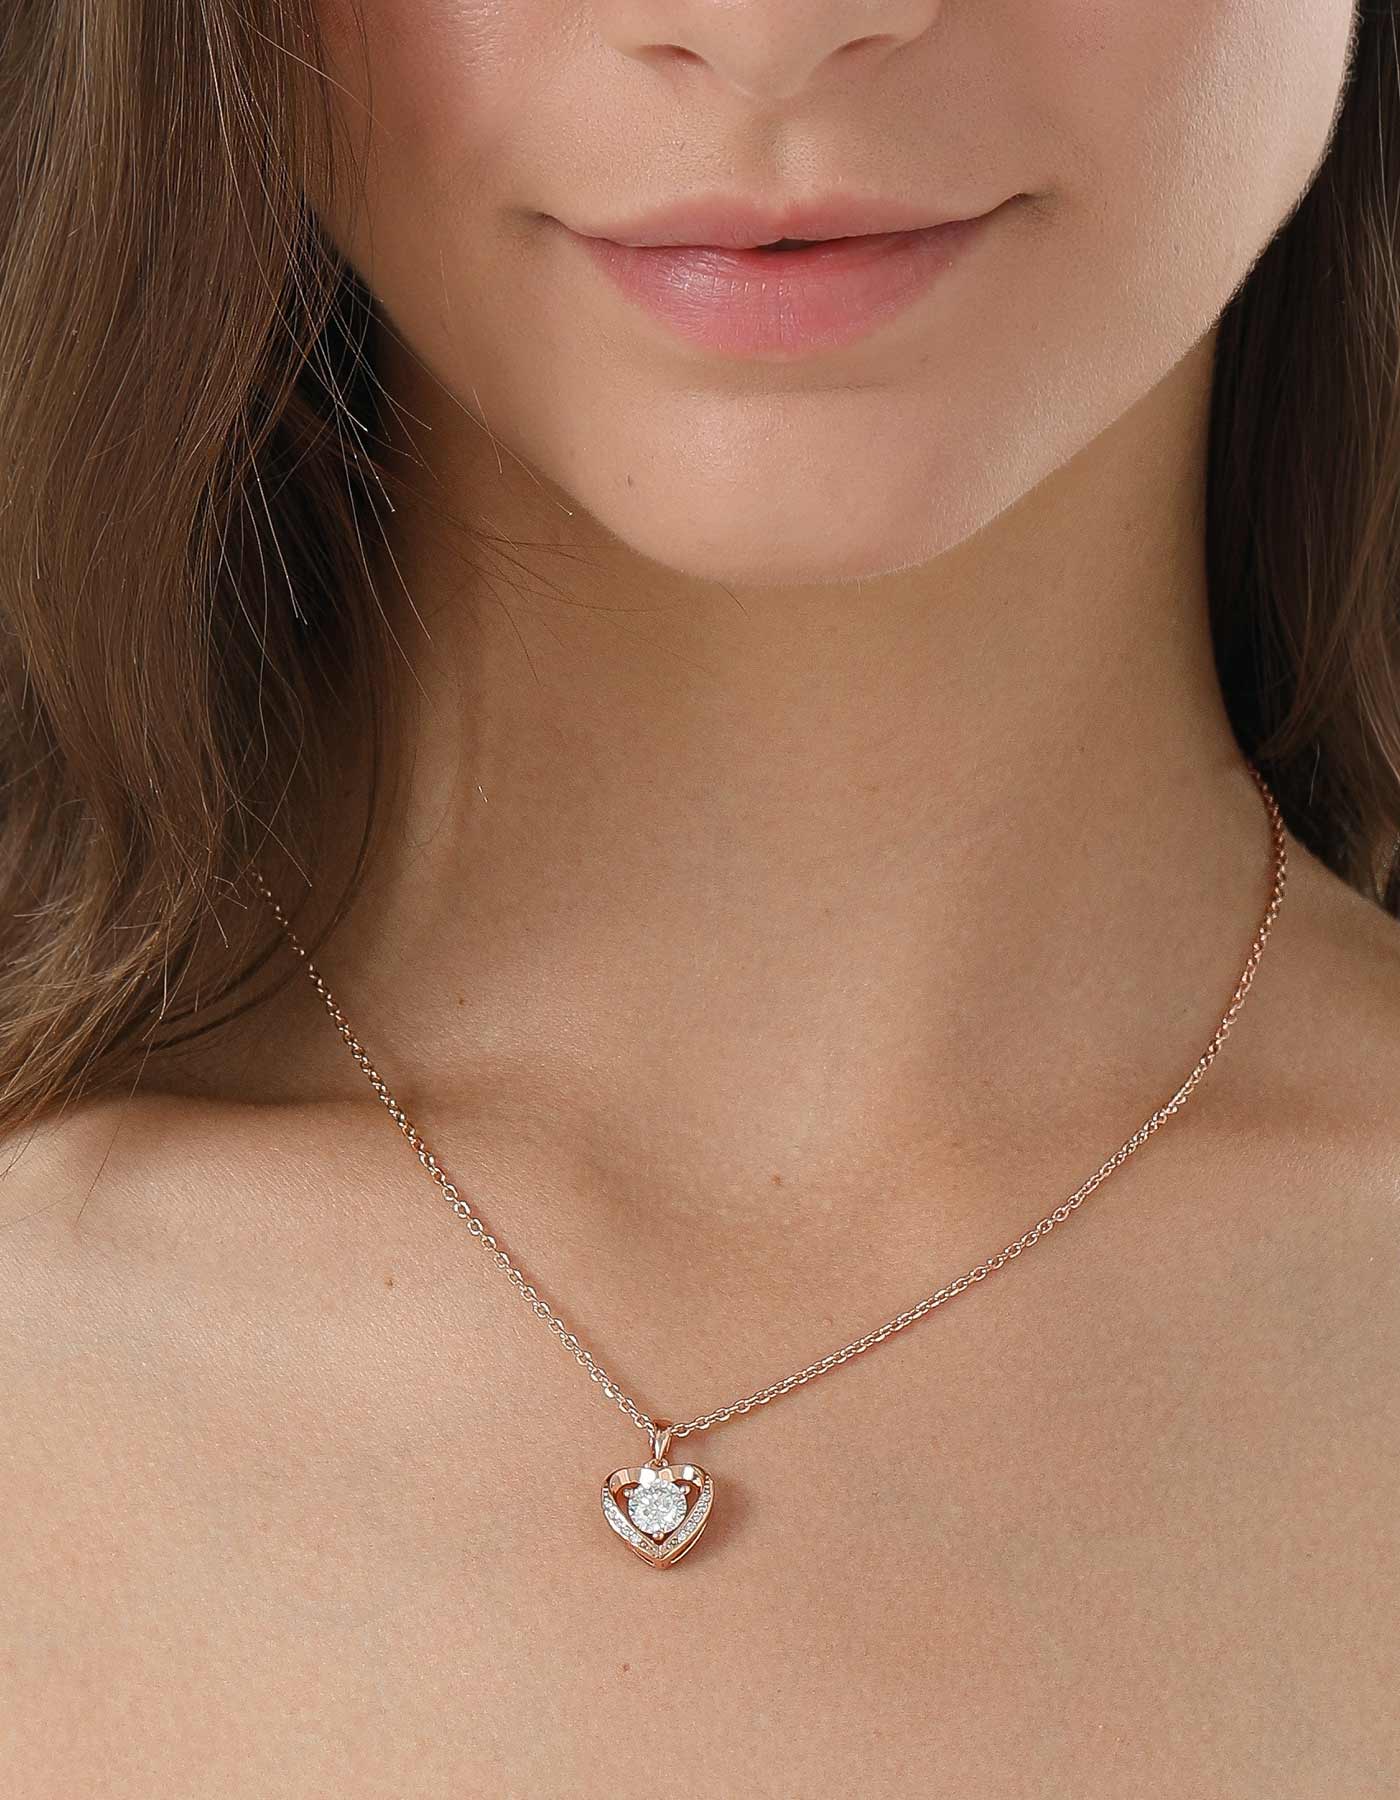 MomentWish Heart Necklace For Women